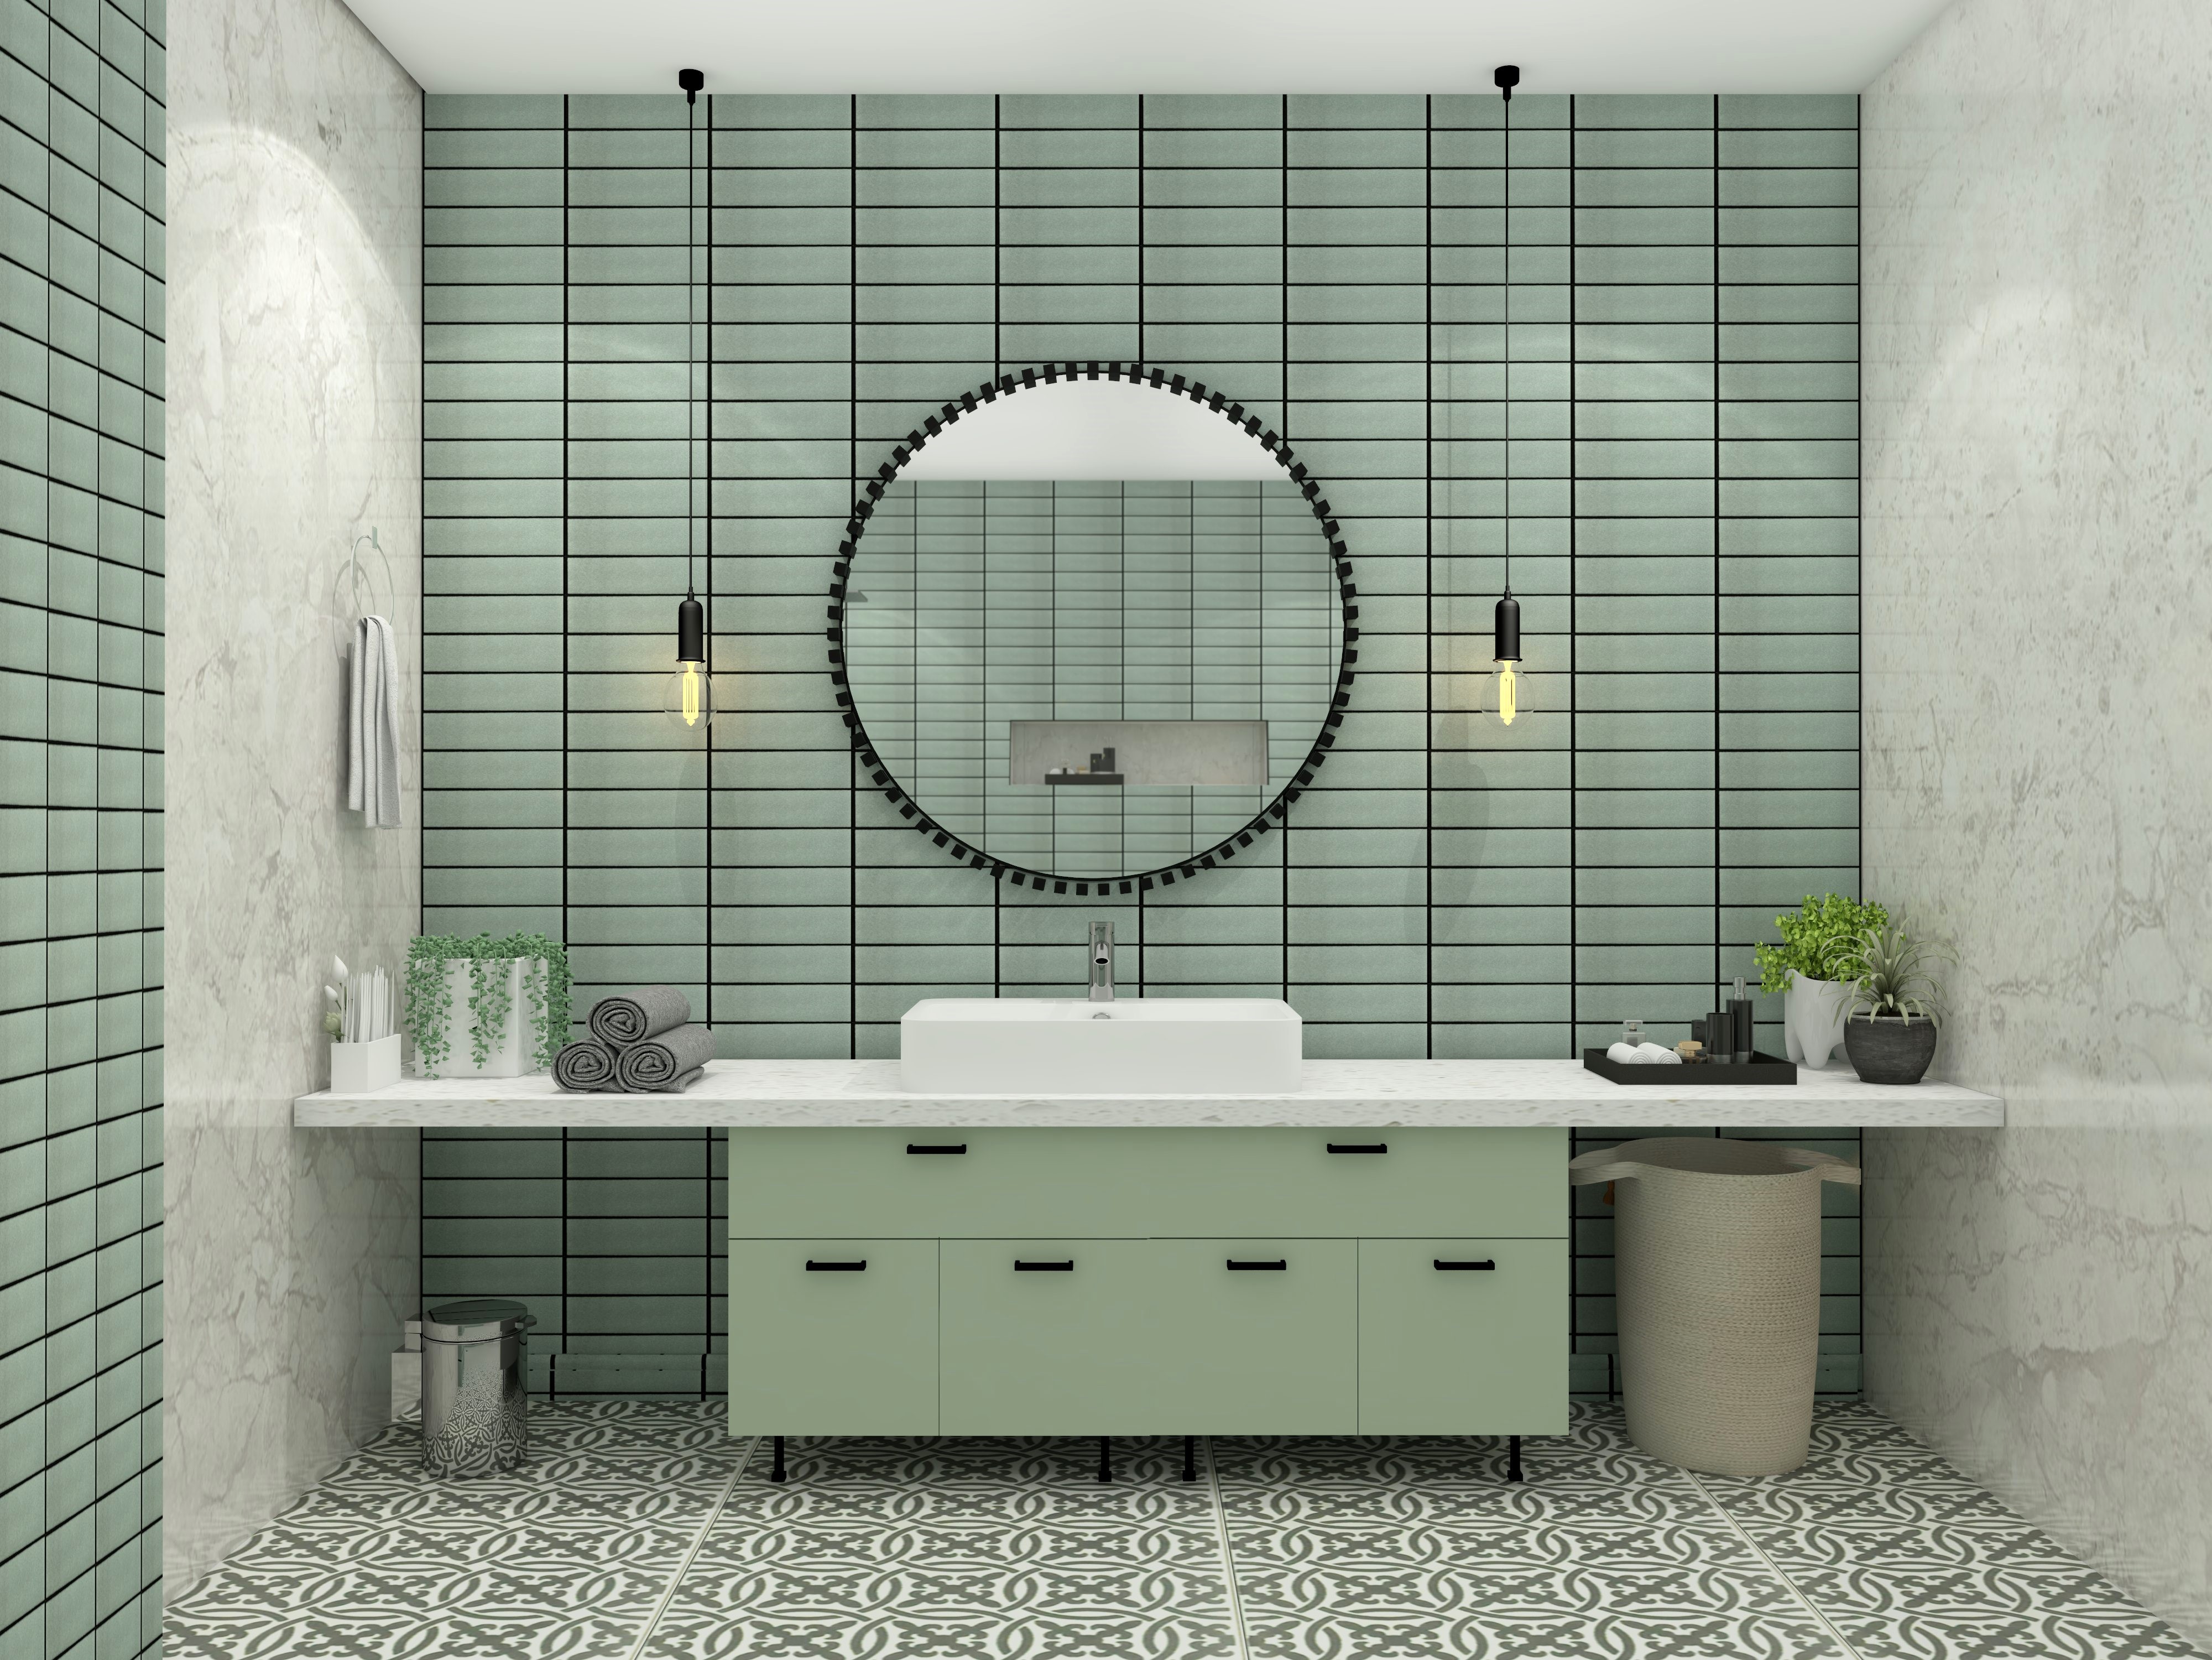 Luxury bathroom with mint green subway tiles and circular mirror - Beautiful Homes